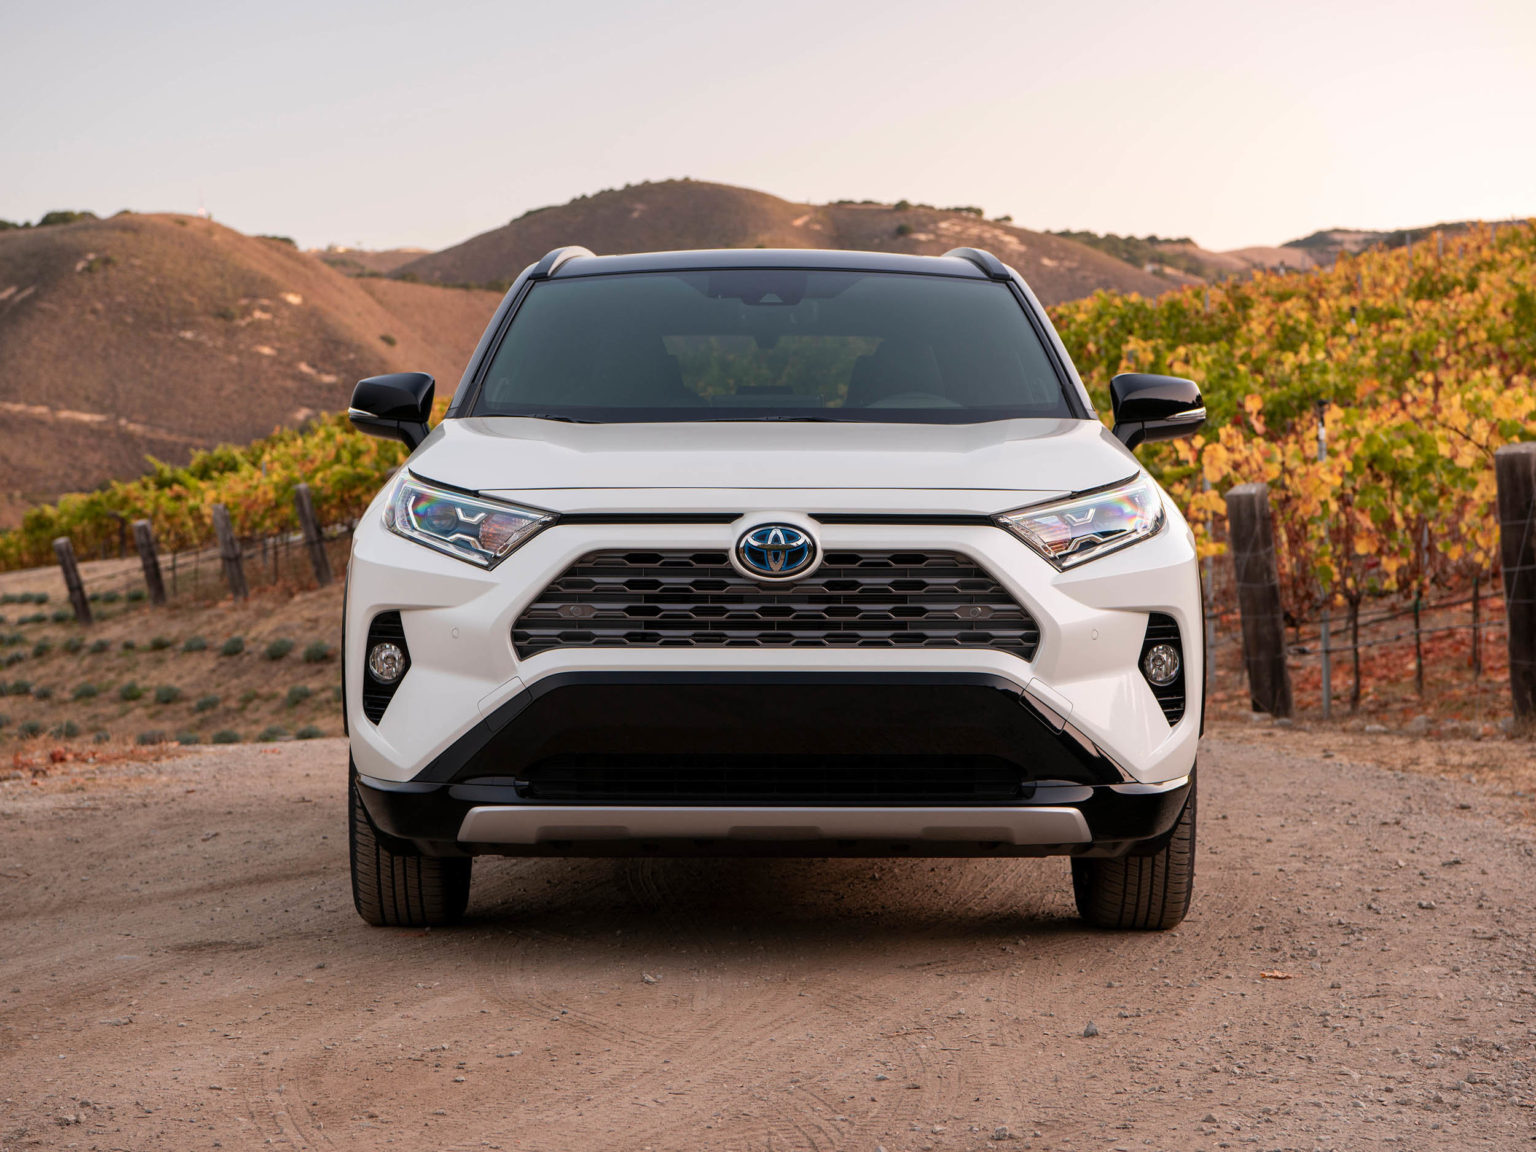 The Toyota RAV4 Hybrid is one of the winners of the U.S. News & World Report 2020 Best Cars for the Money awards.